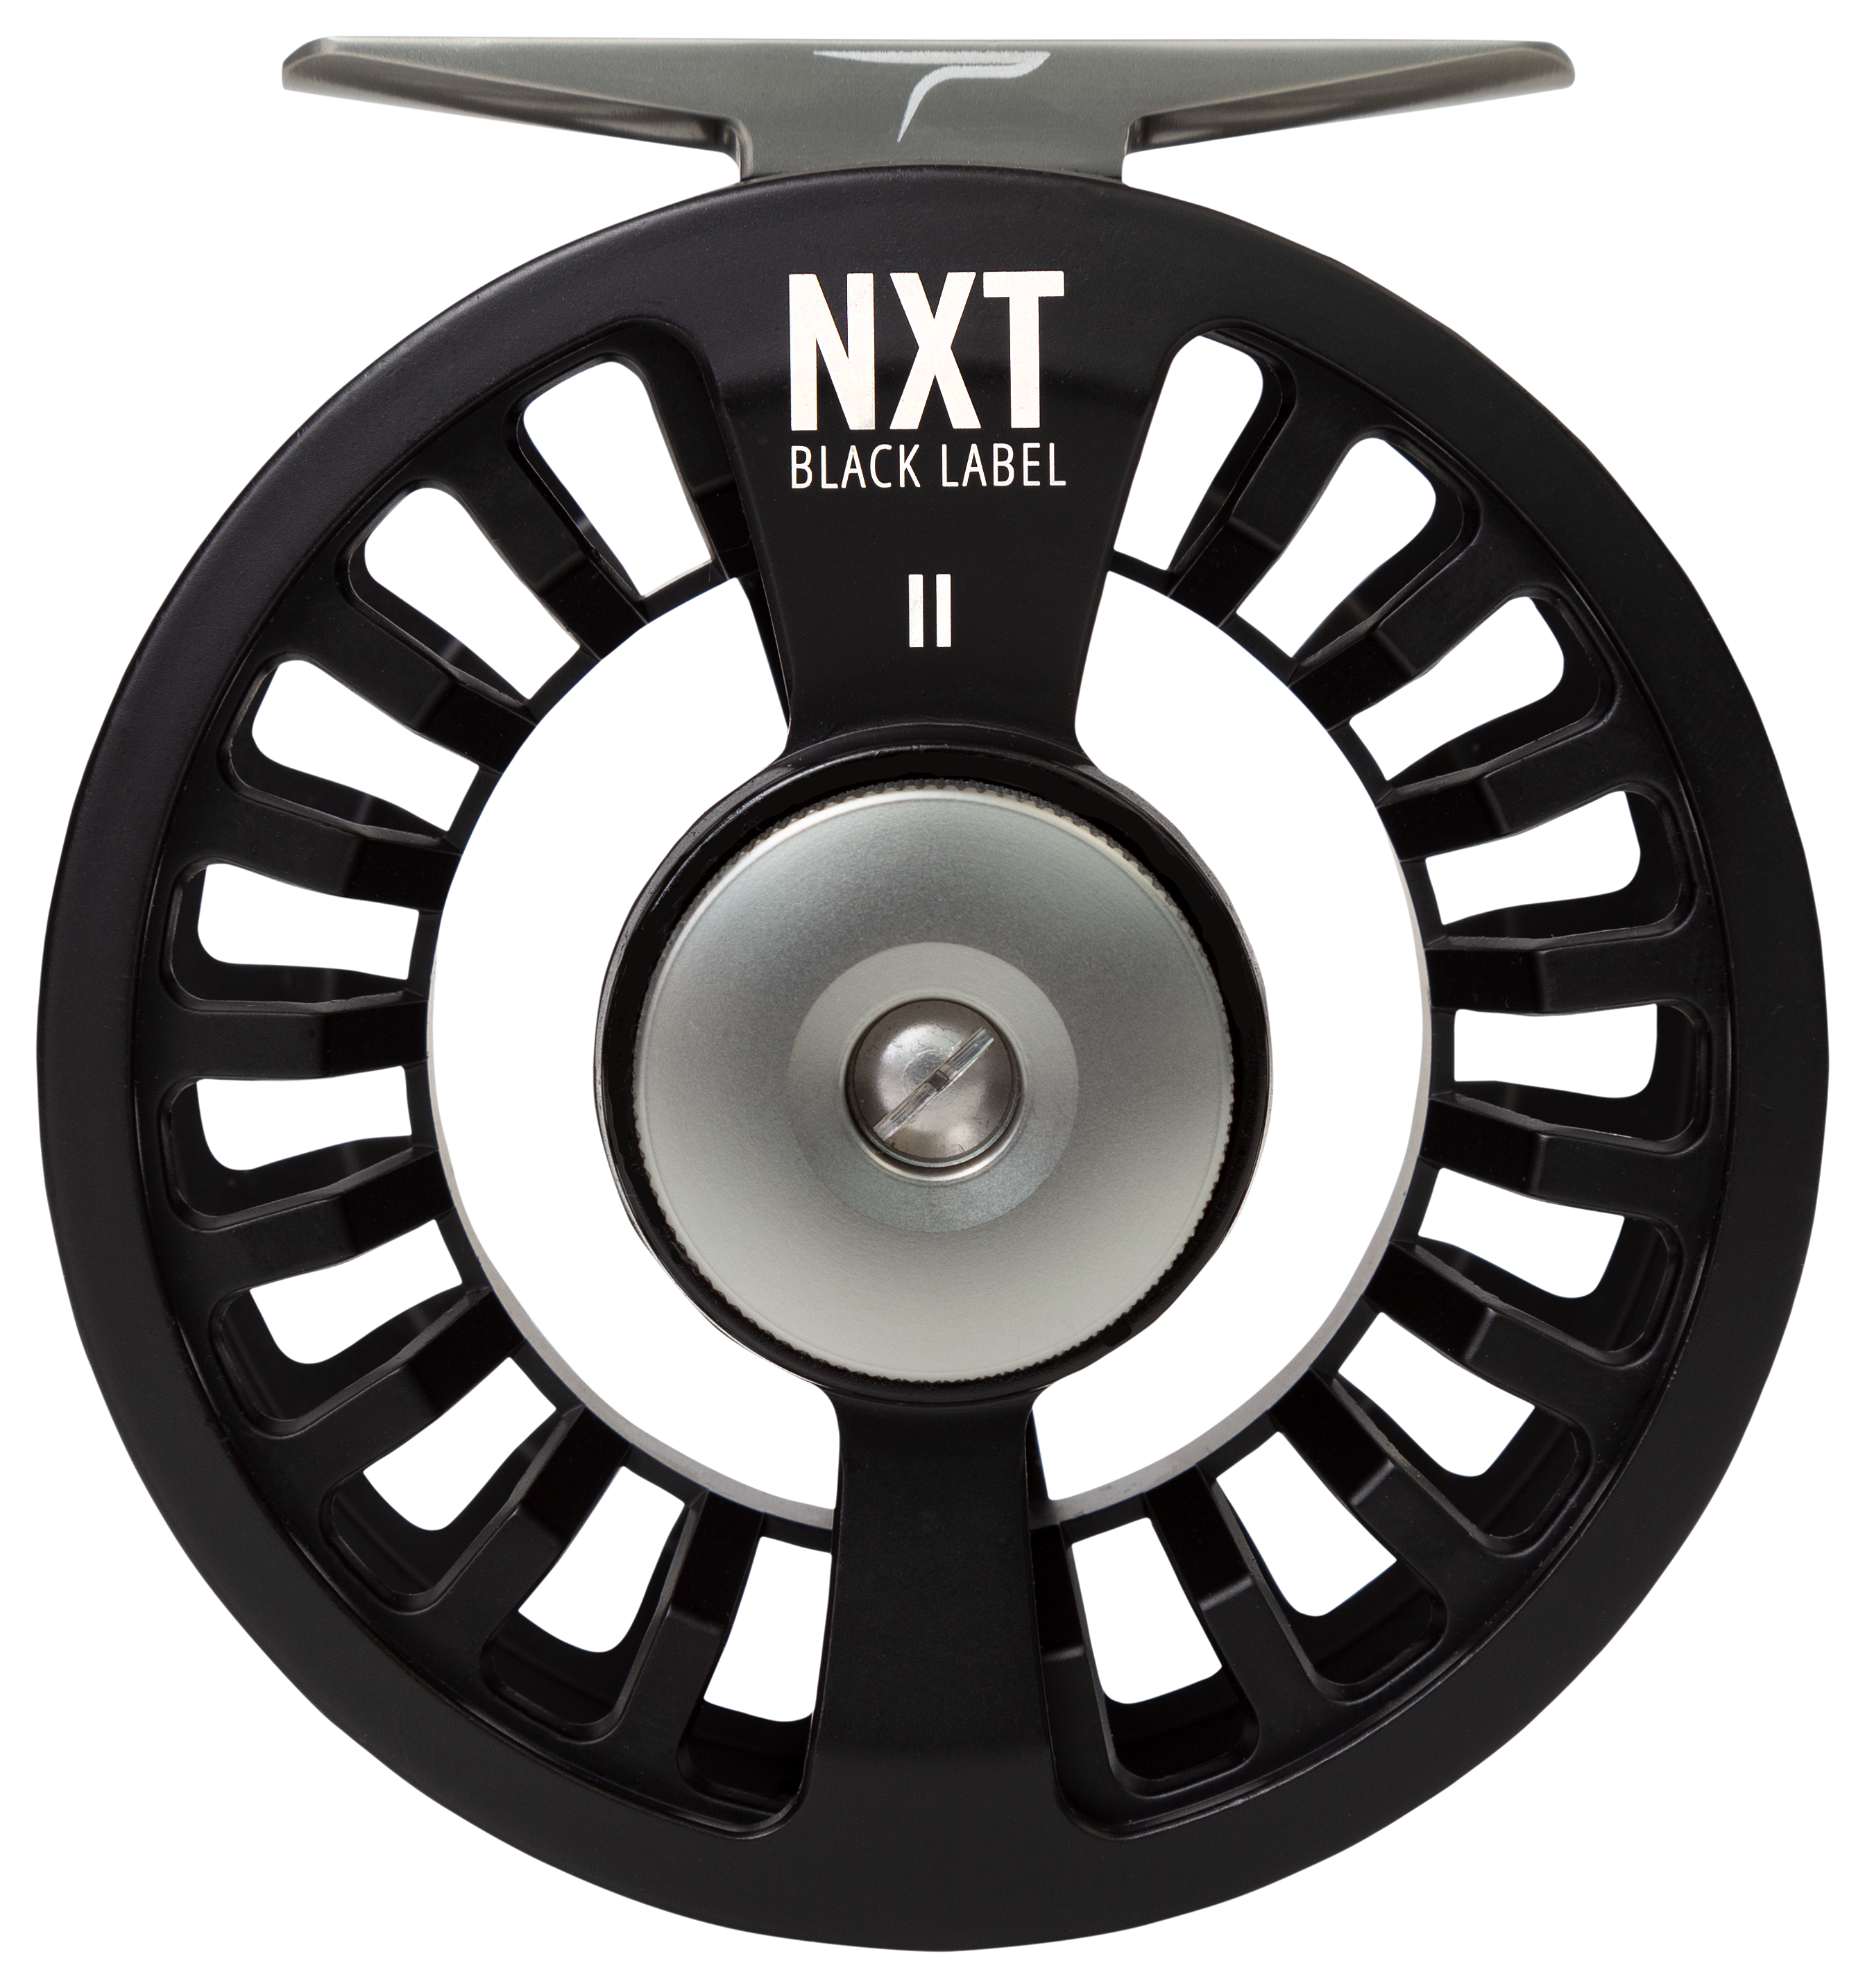 Temple Fork Outfitters NXT Black Label Fly Reel - TFR NXT BLK III